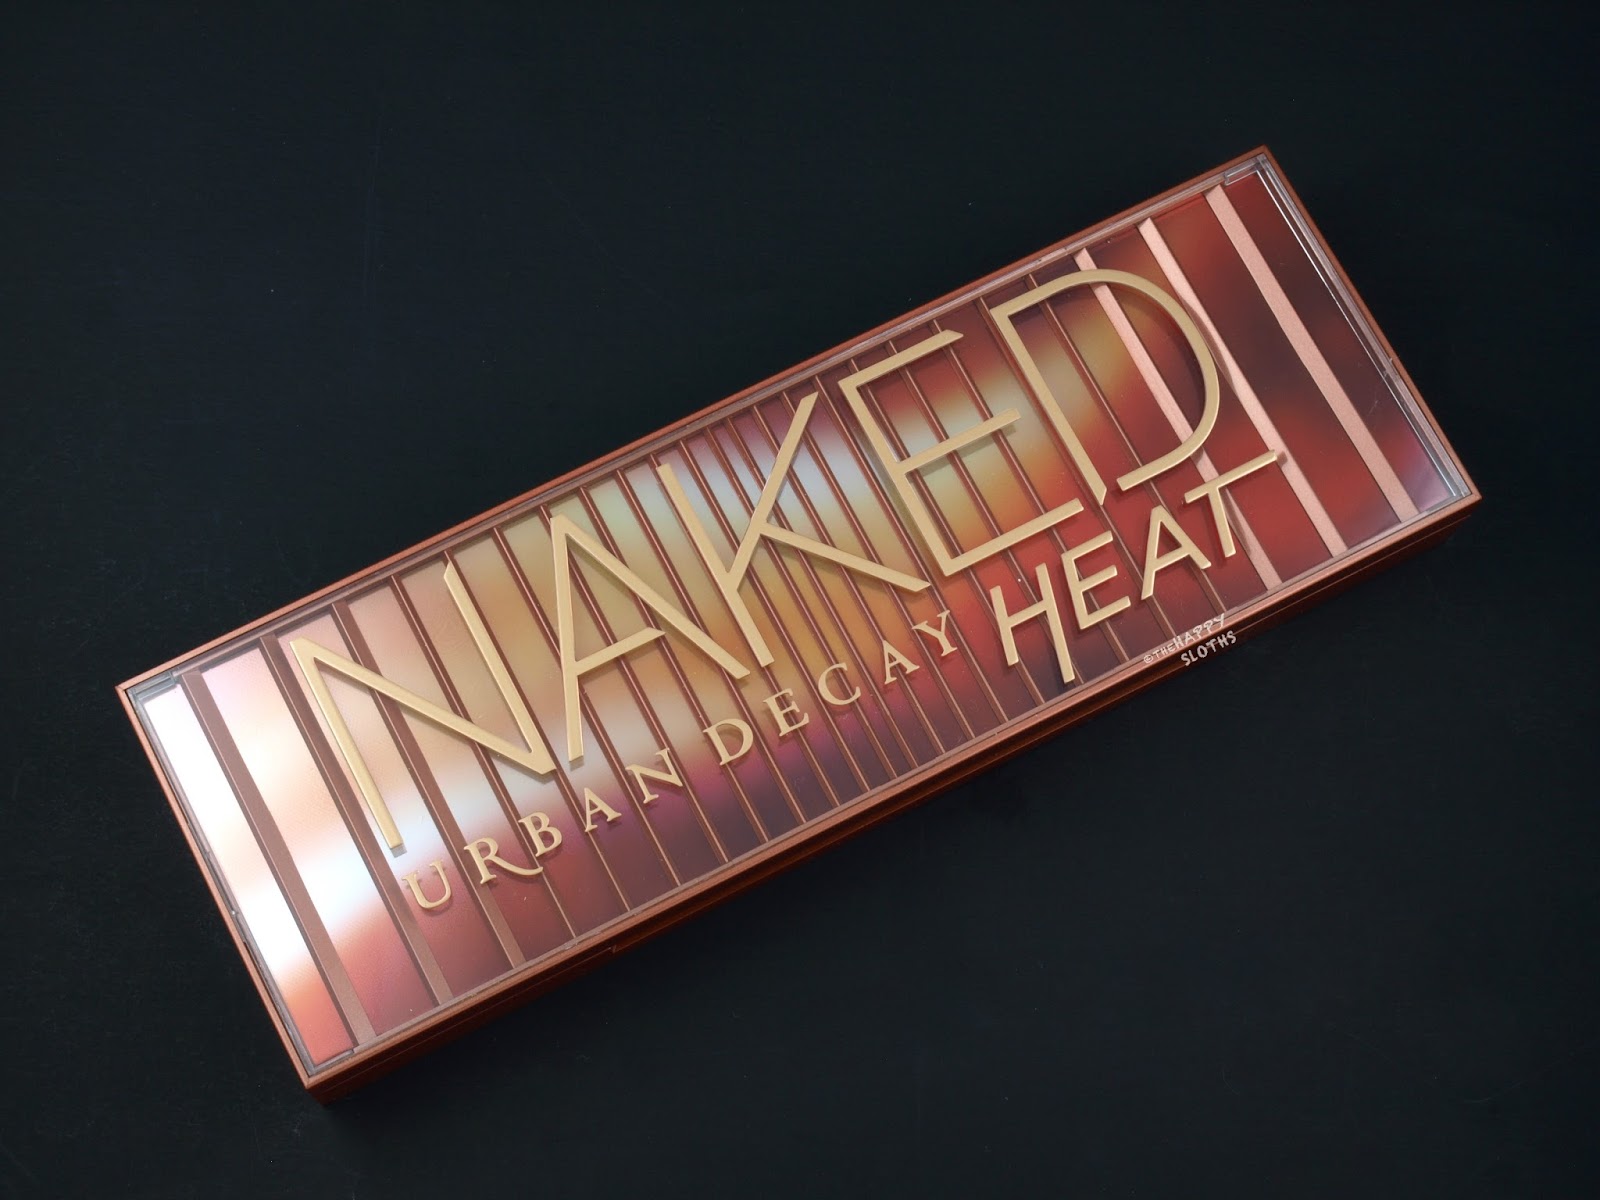 Urban Decay Naked Heat Eyeshadow Palette Swatches and Review